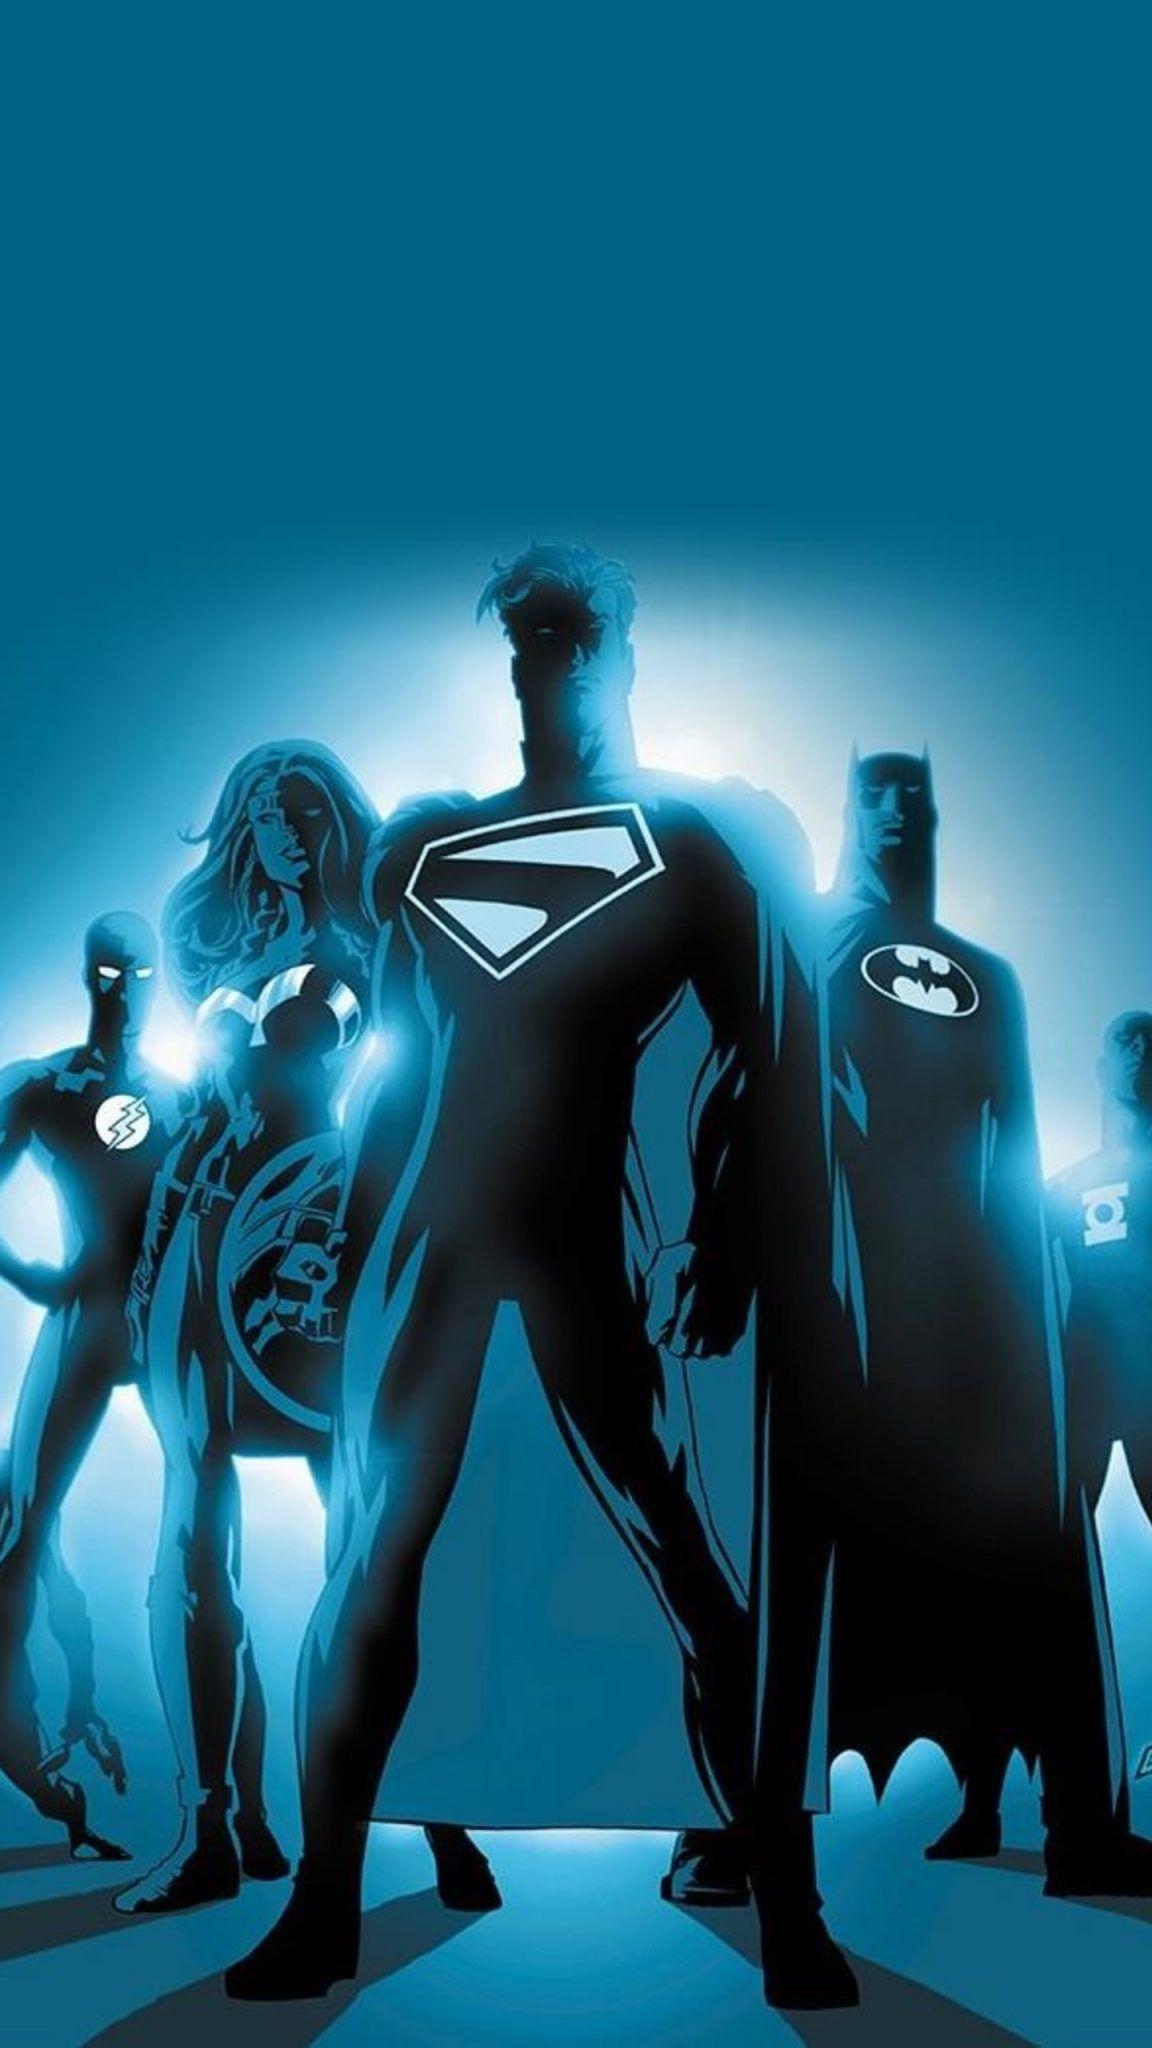 Top Justice League wallpaper handpicked for you